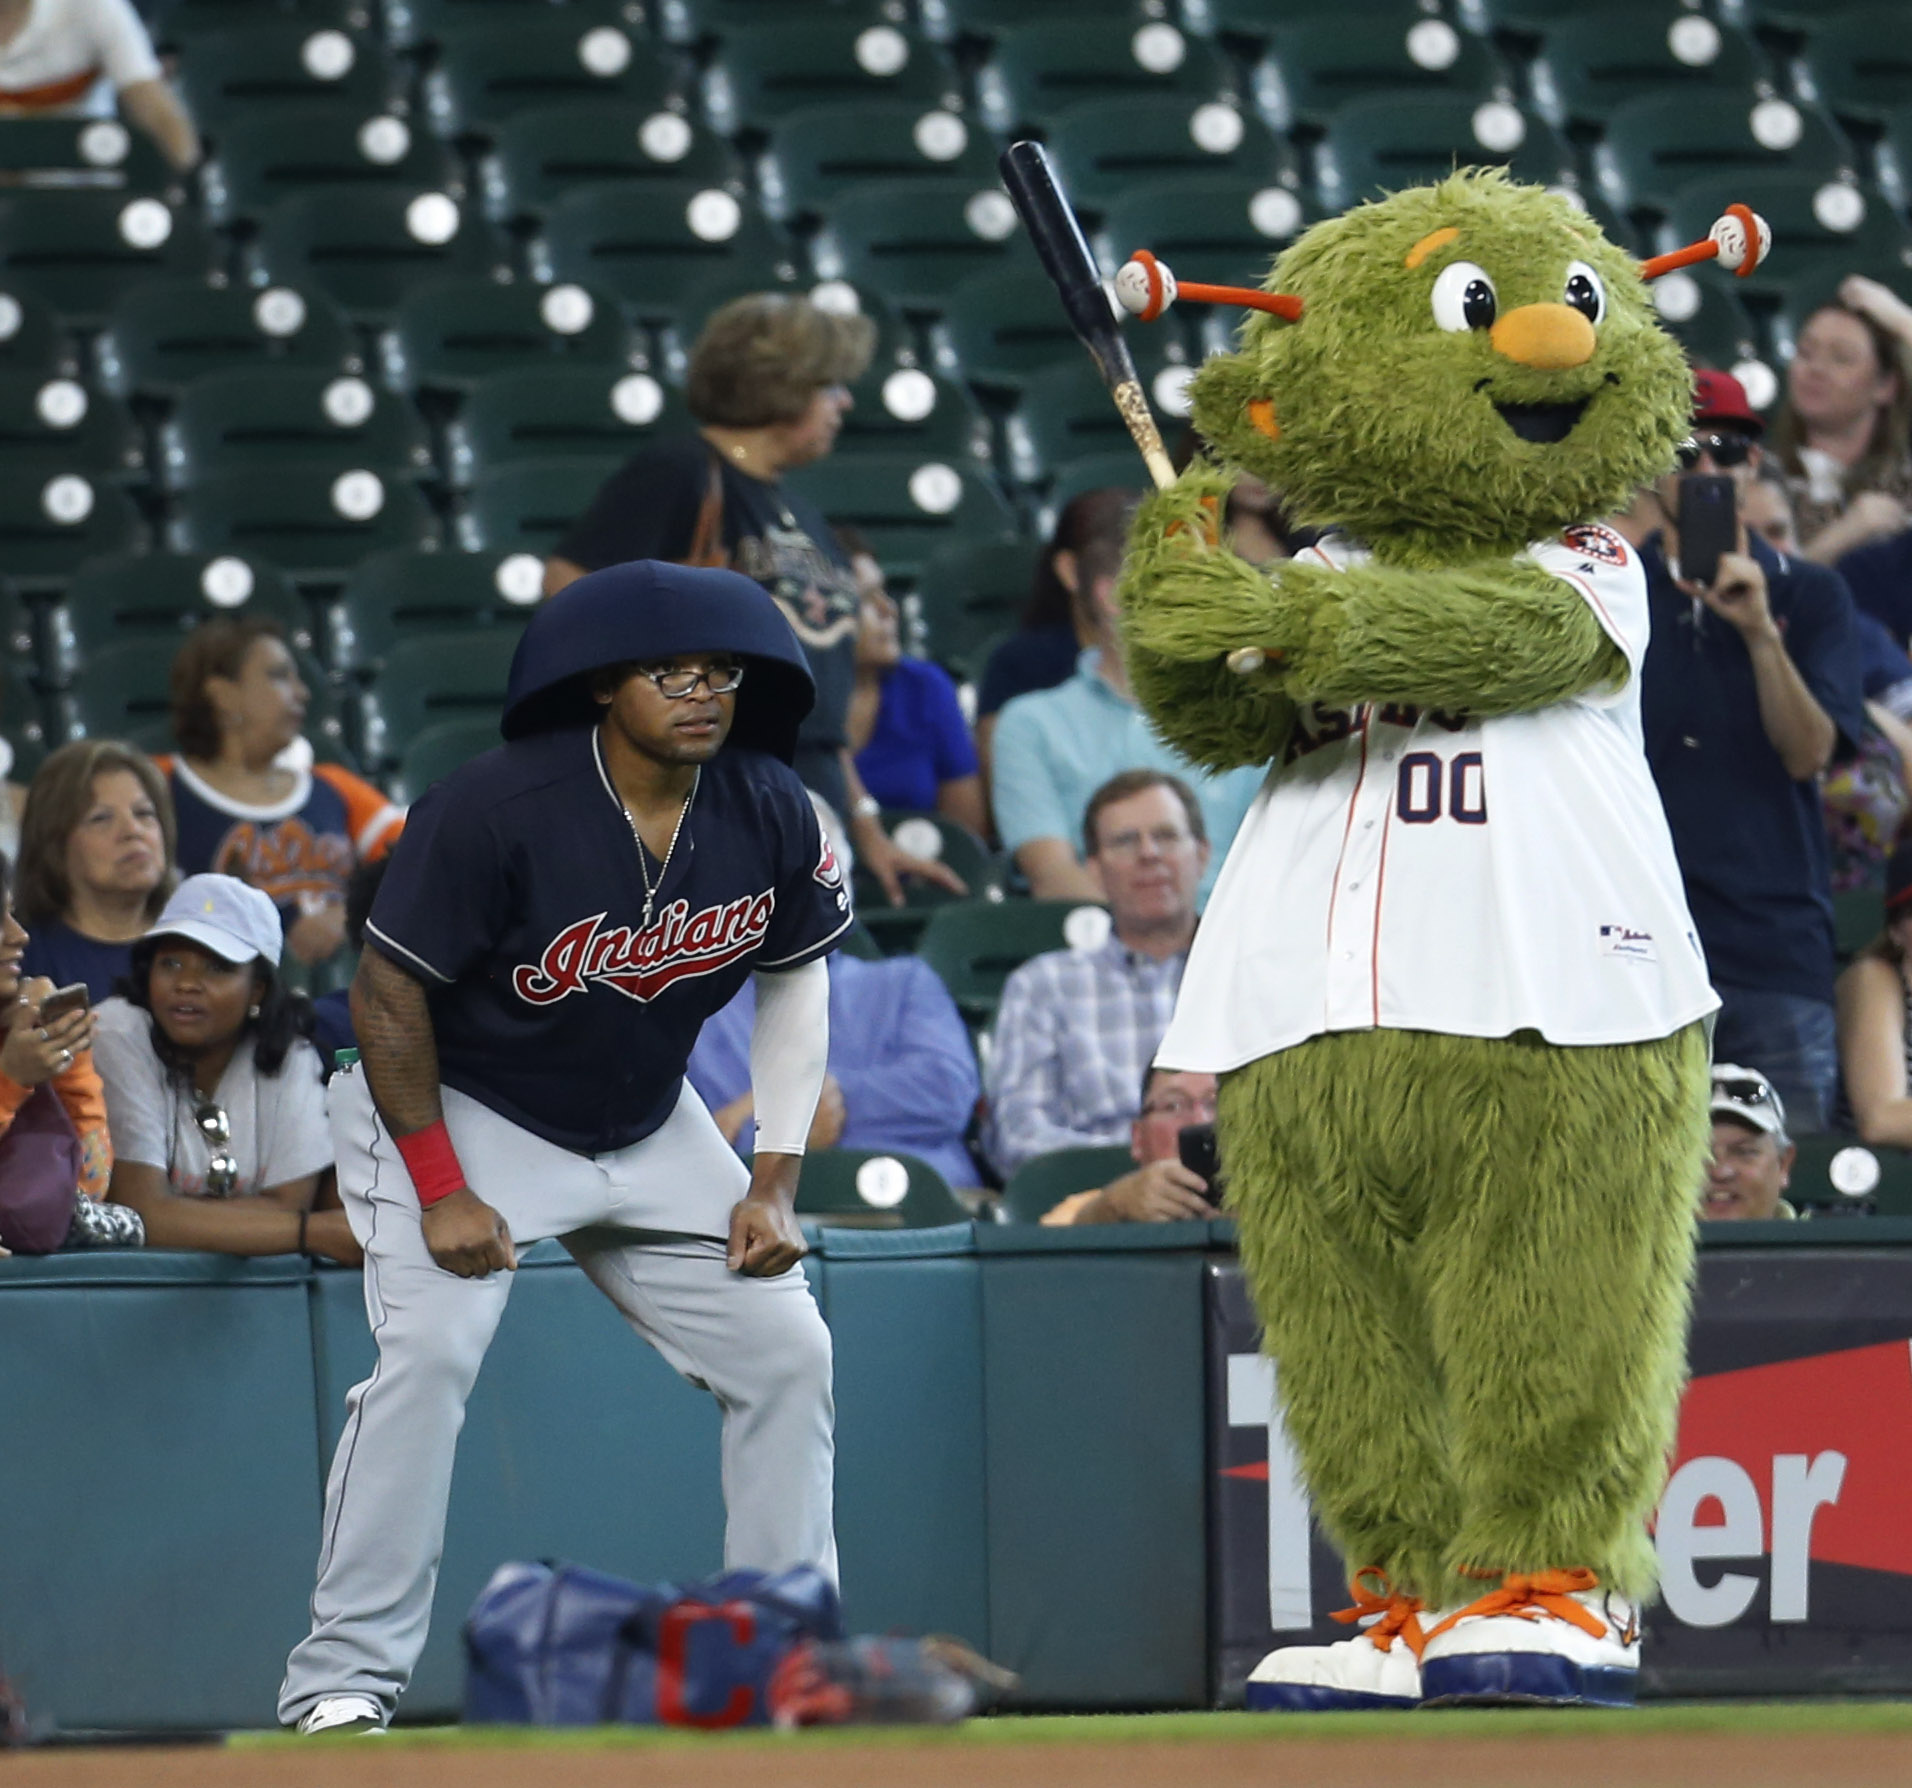 Chris Archer's Feud With the Astros' Mascot Has Escalated